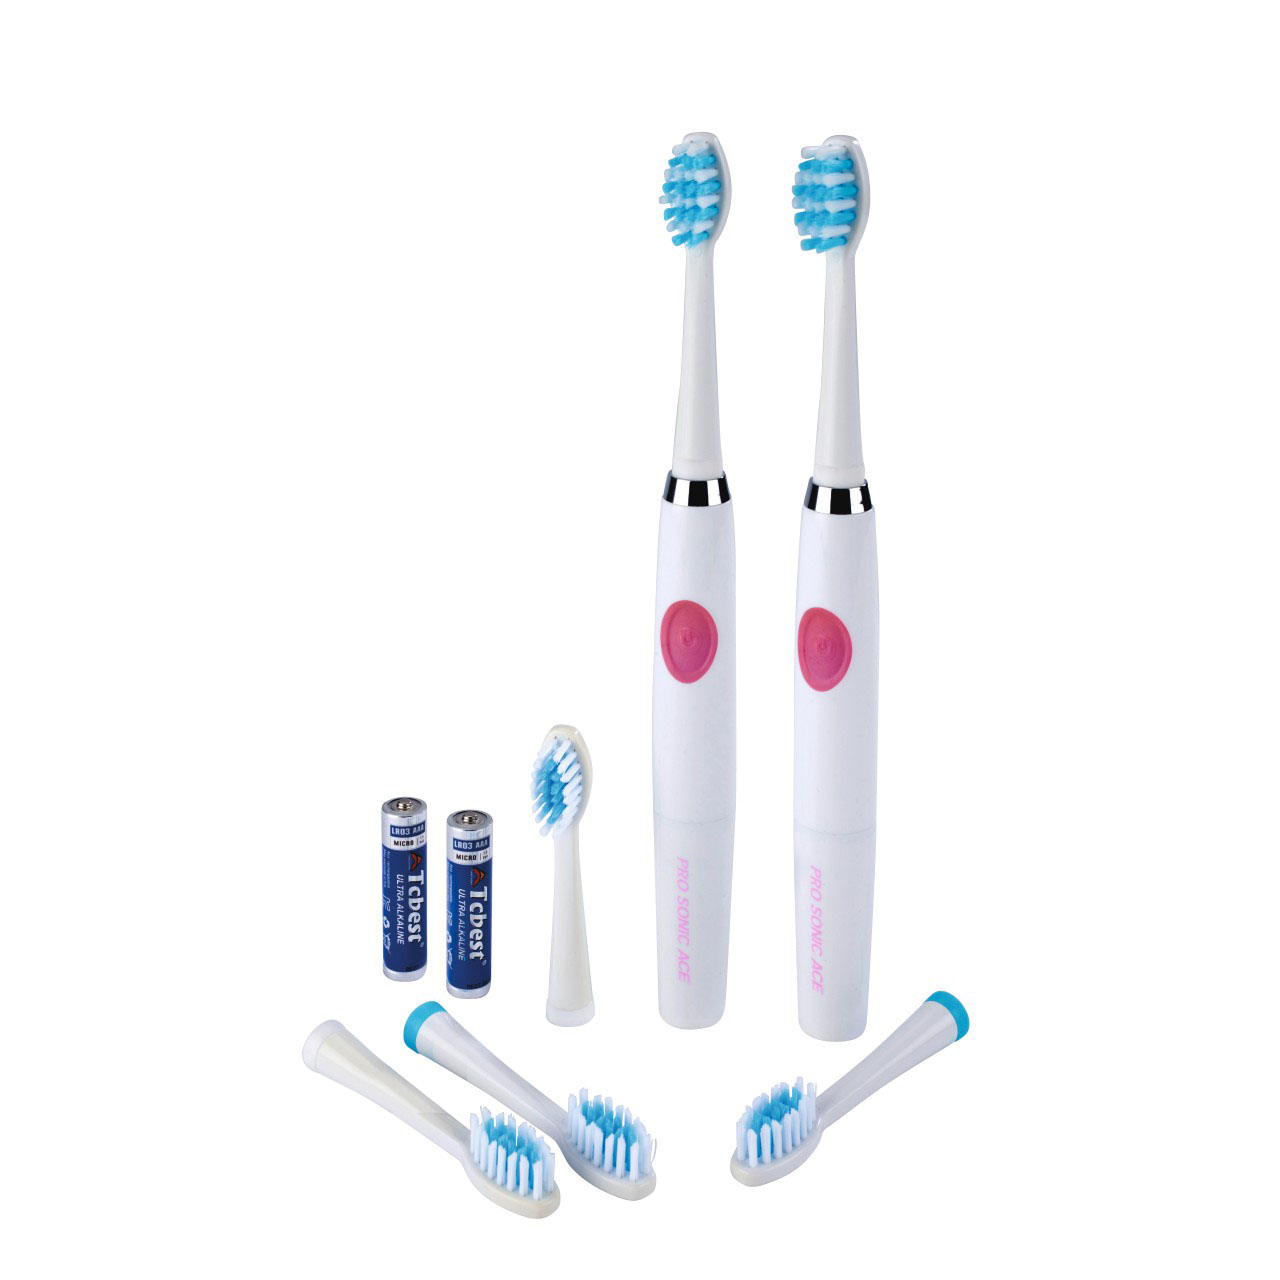 Extra Toothbrush Heads for Sonic Travel Toothbrush - Pack of 4